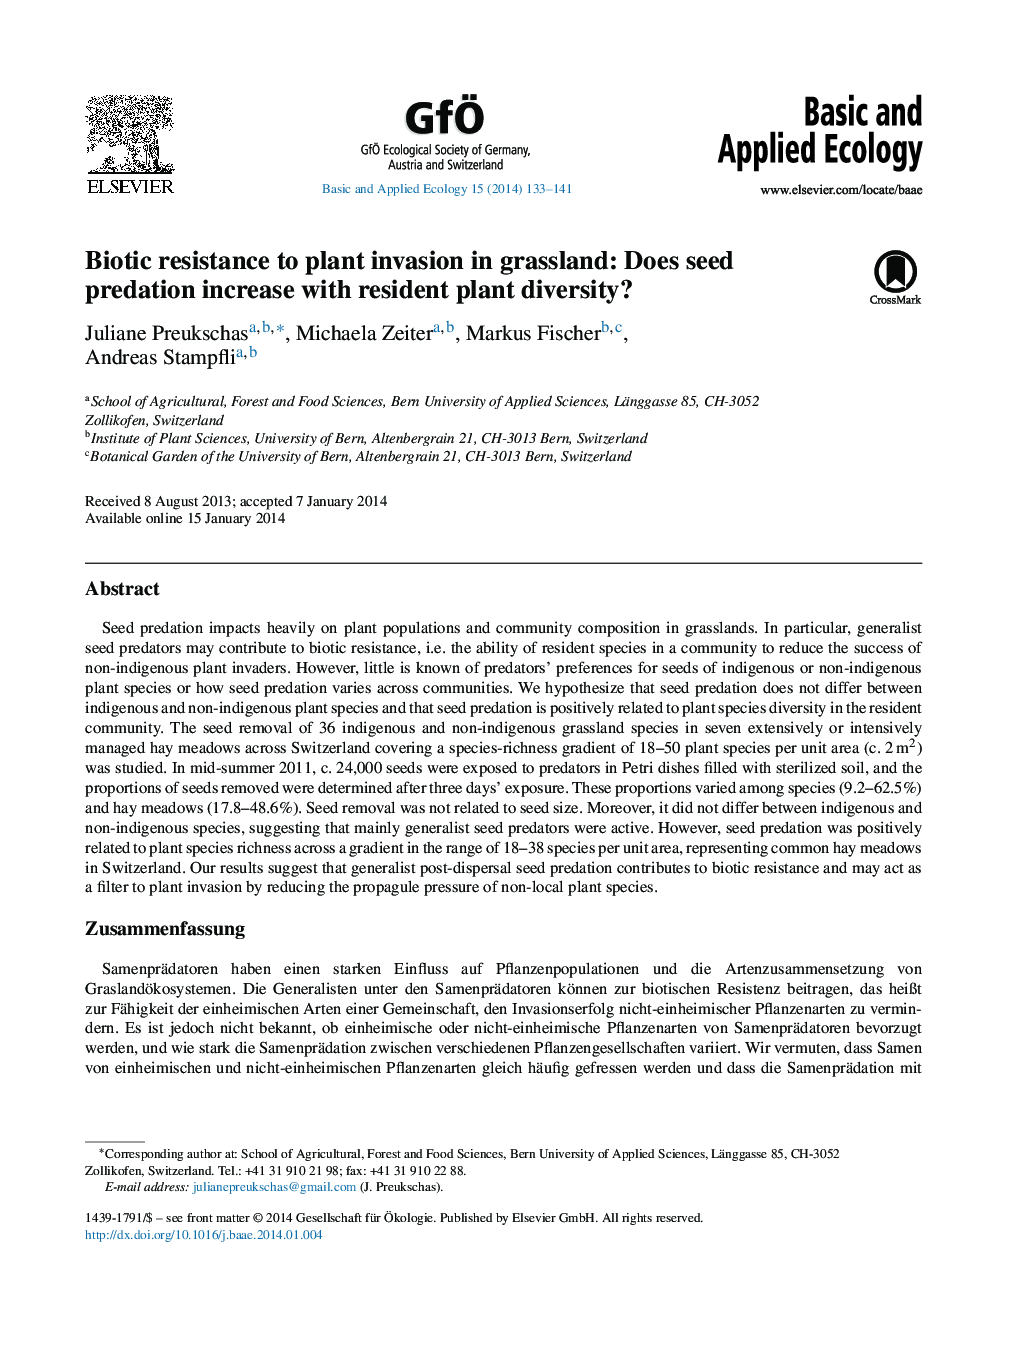 Biotic resistance to plant invasion in grassland: Does seed predation increase with resident plant diversity?